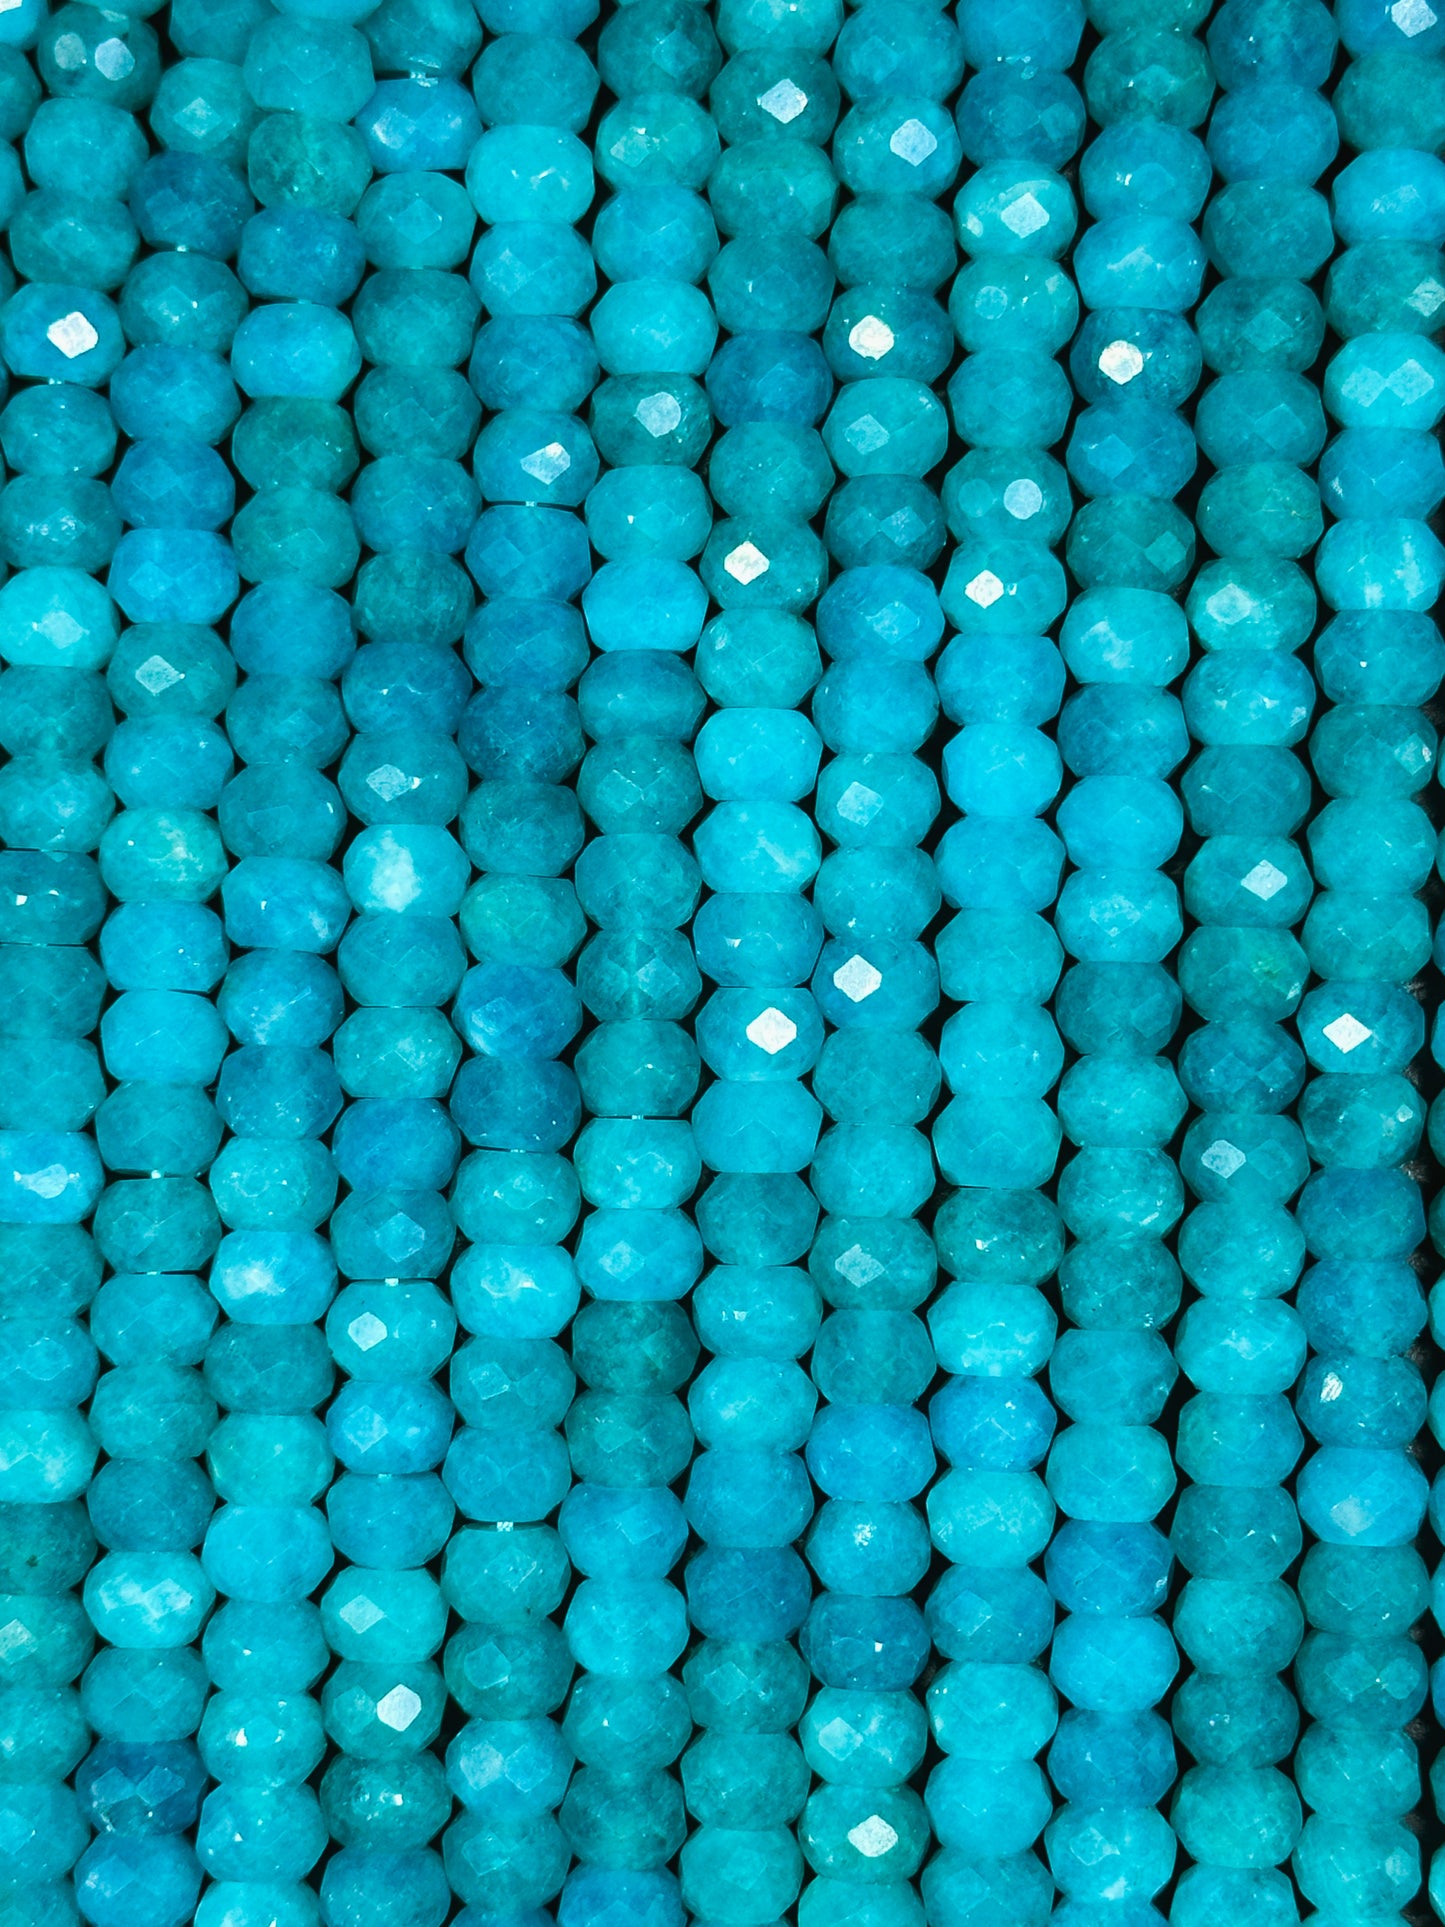 AA Natural Amazonite Gemstone Bead Faceted 8x6mm Rondelle Shape, Gorgeous Natural Blue Green Color Amazonite Great Quality Full Strand 15.5"